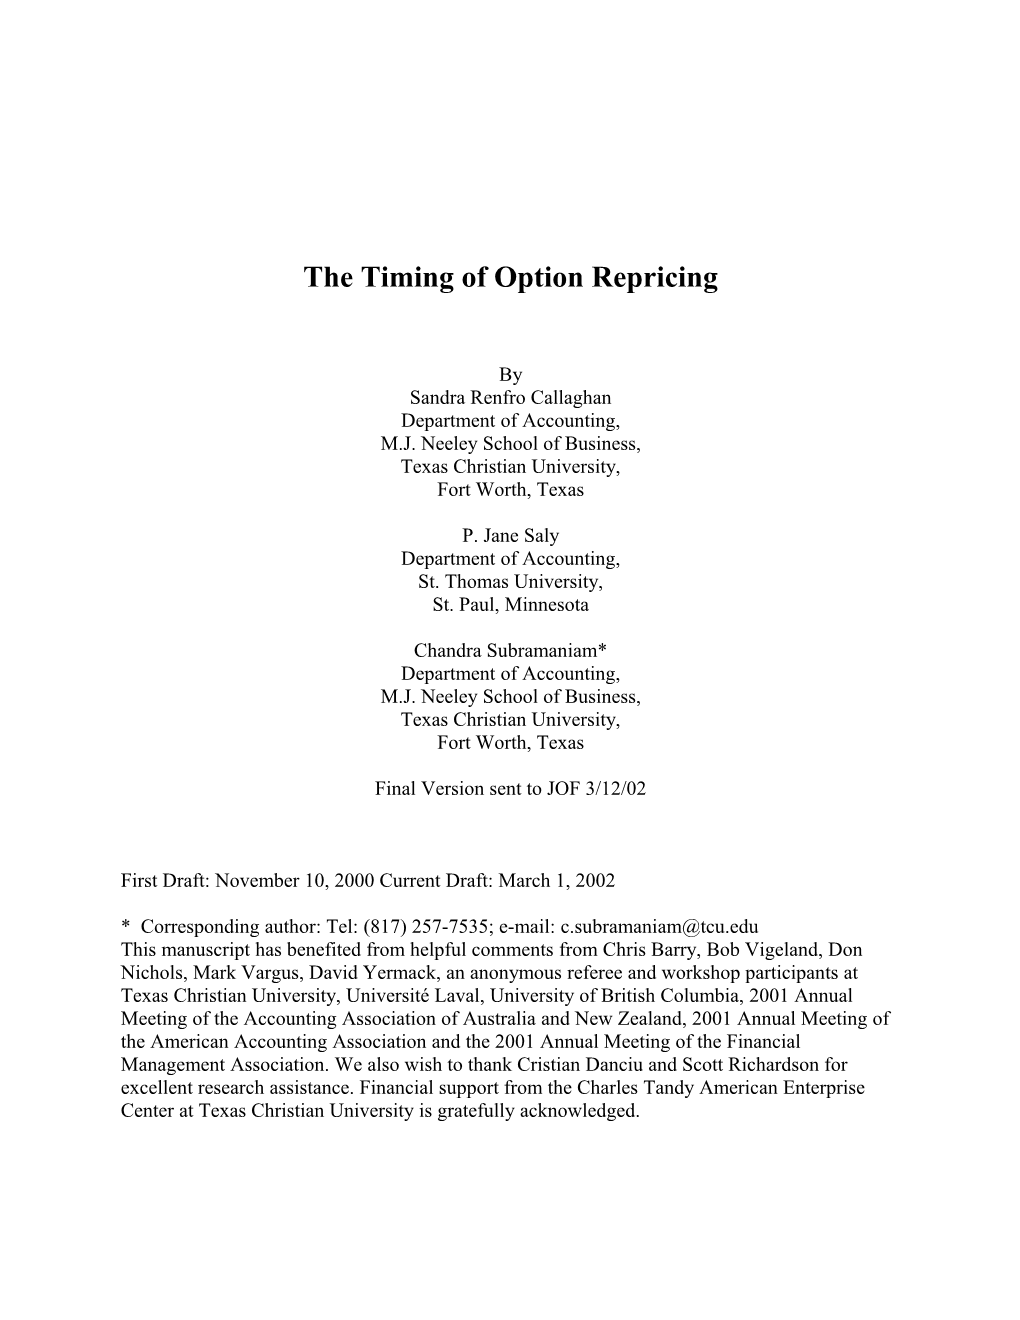 The Timing of Option Repricing